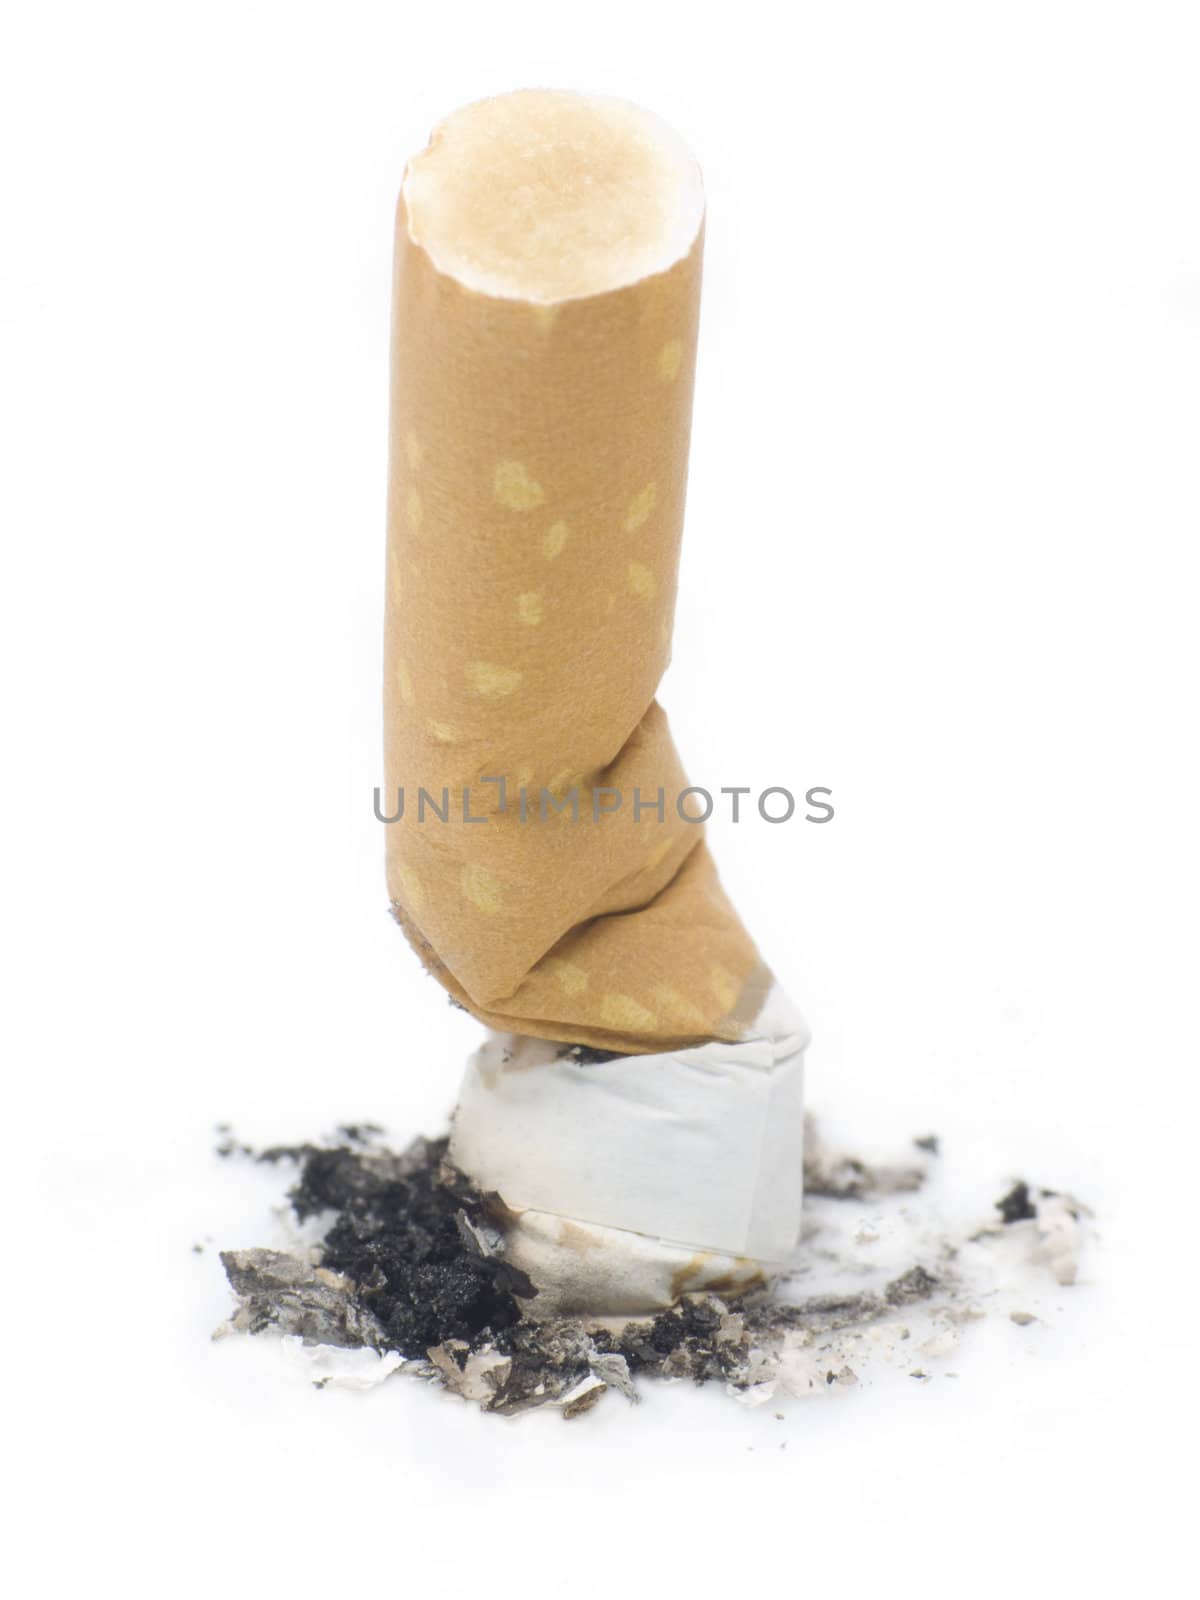 Cigarette But on a white background depictiong unhealthy behaviour